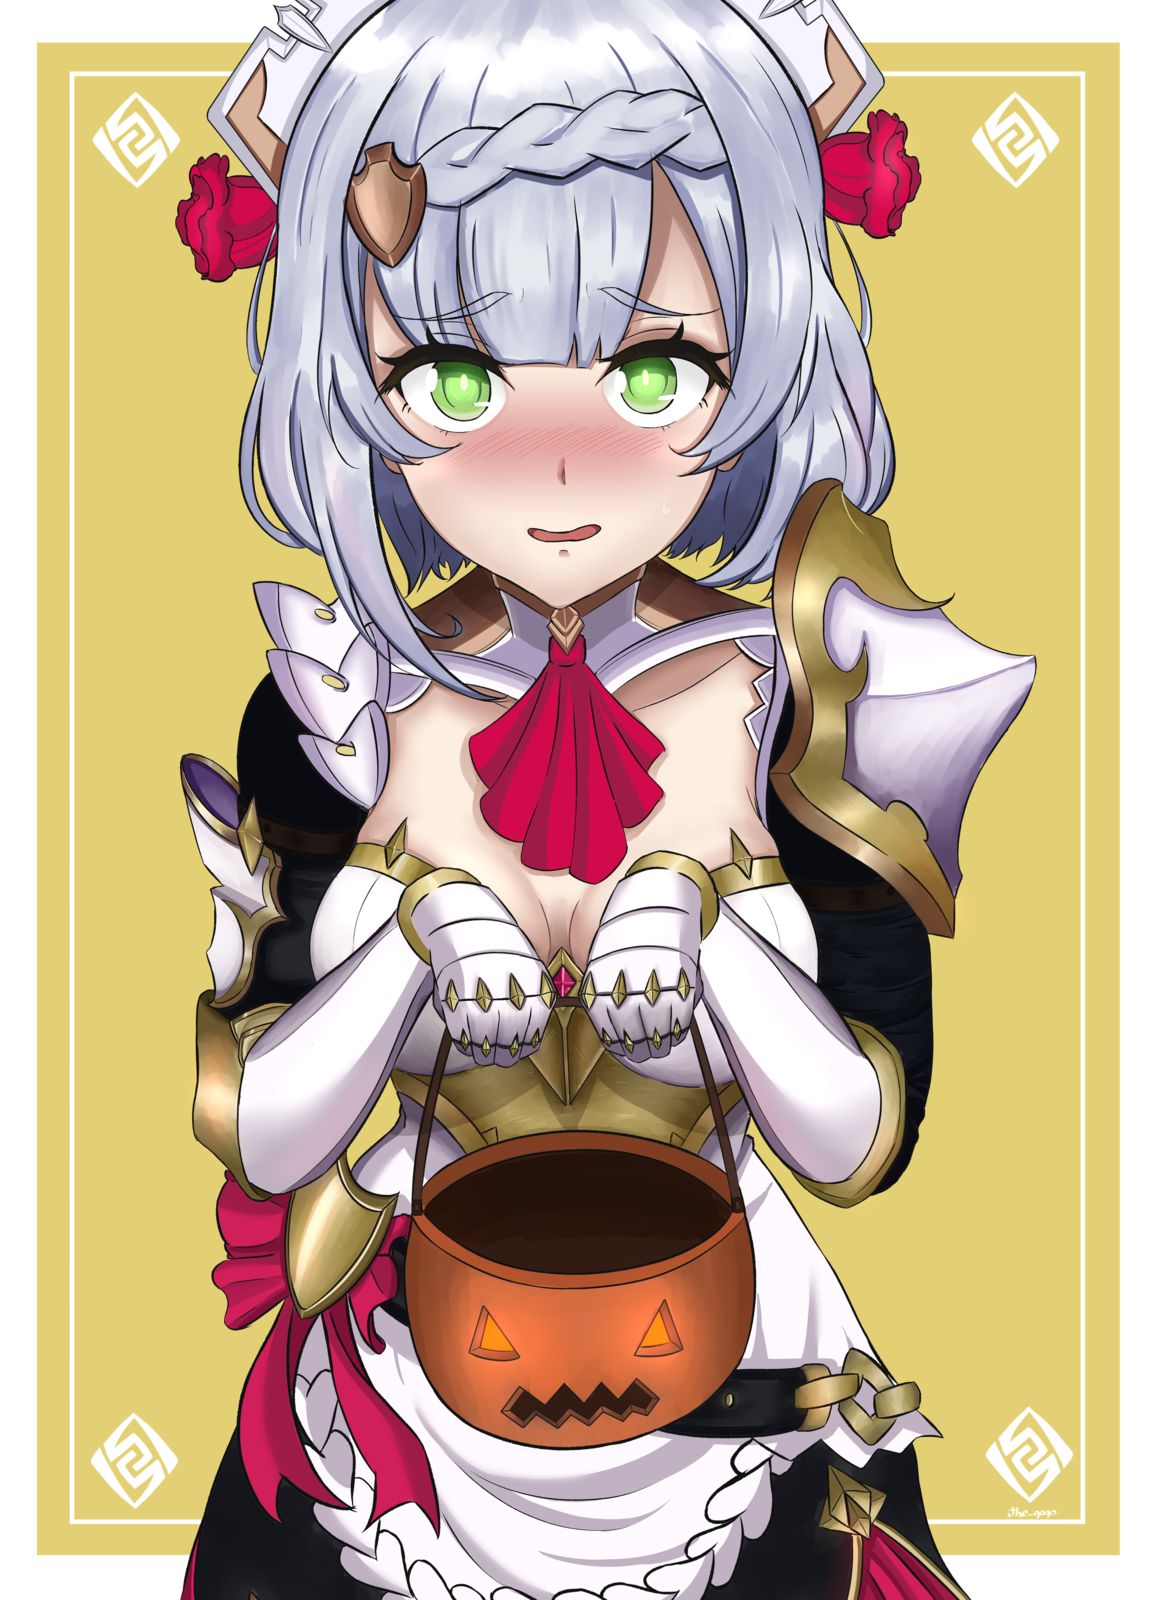 Noelle wants some candies